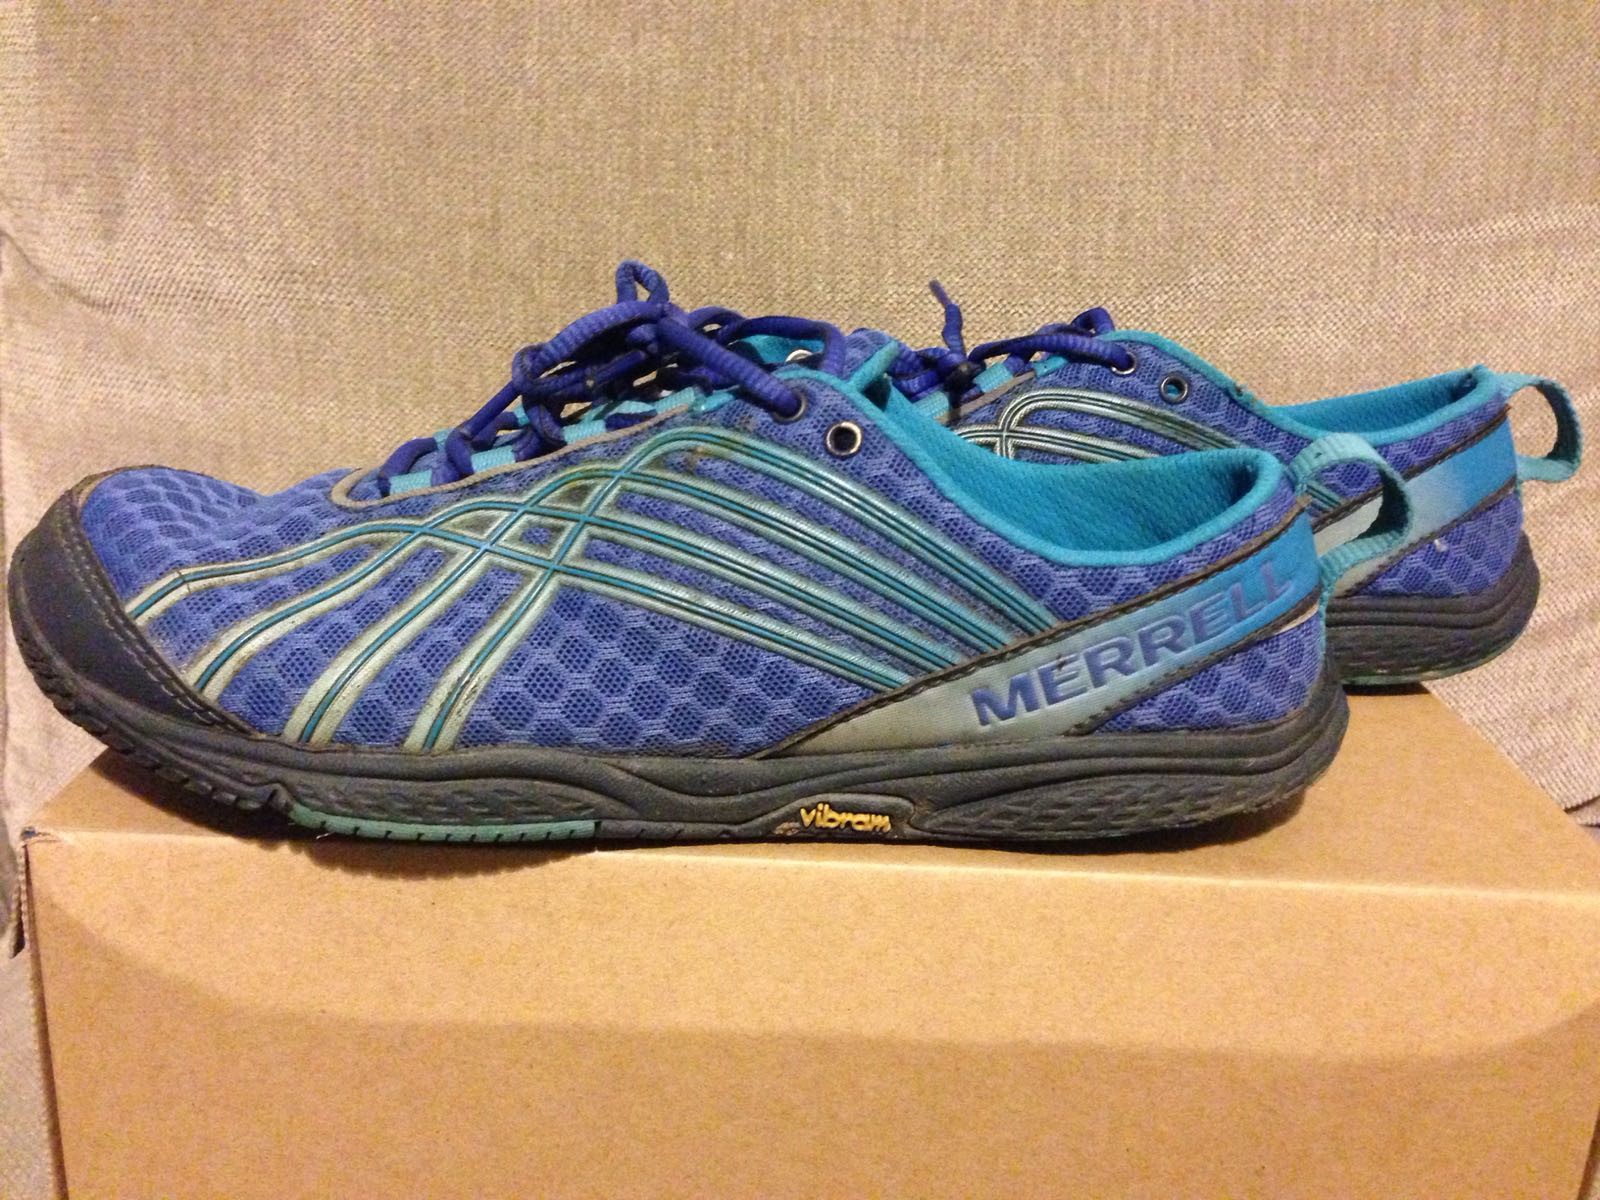 Running Solutions: Are There Any Benefits In Running With Zero Drop Shoes?